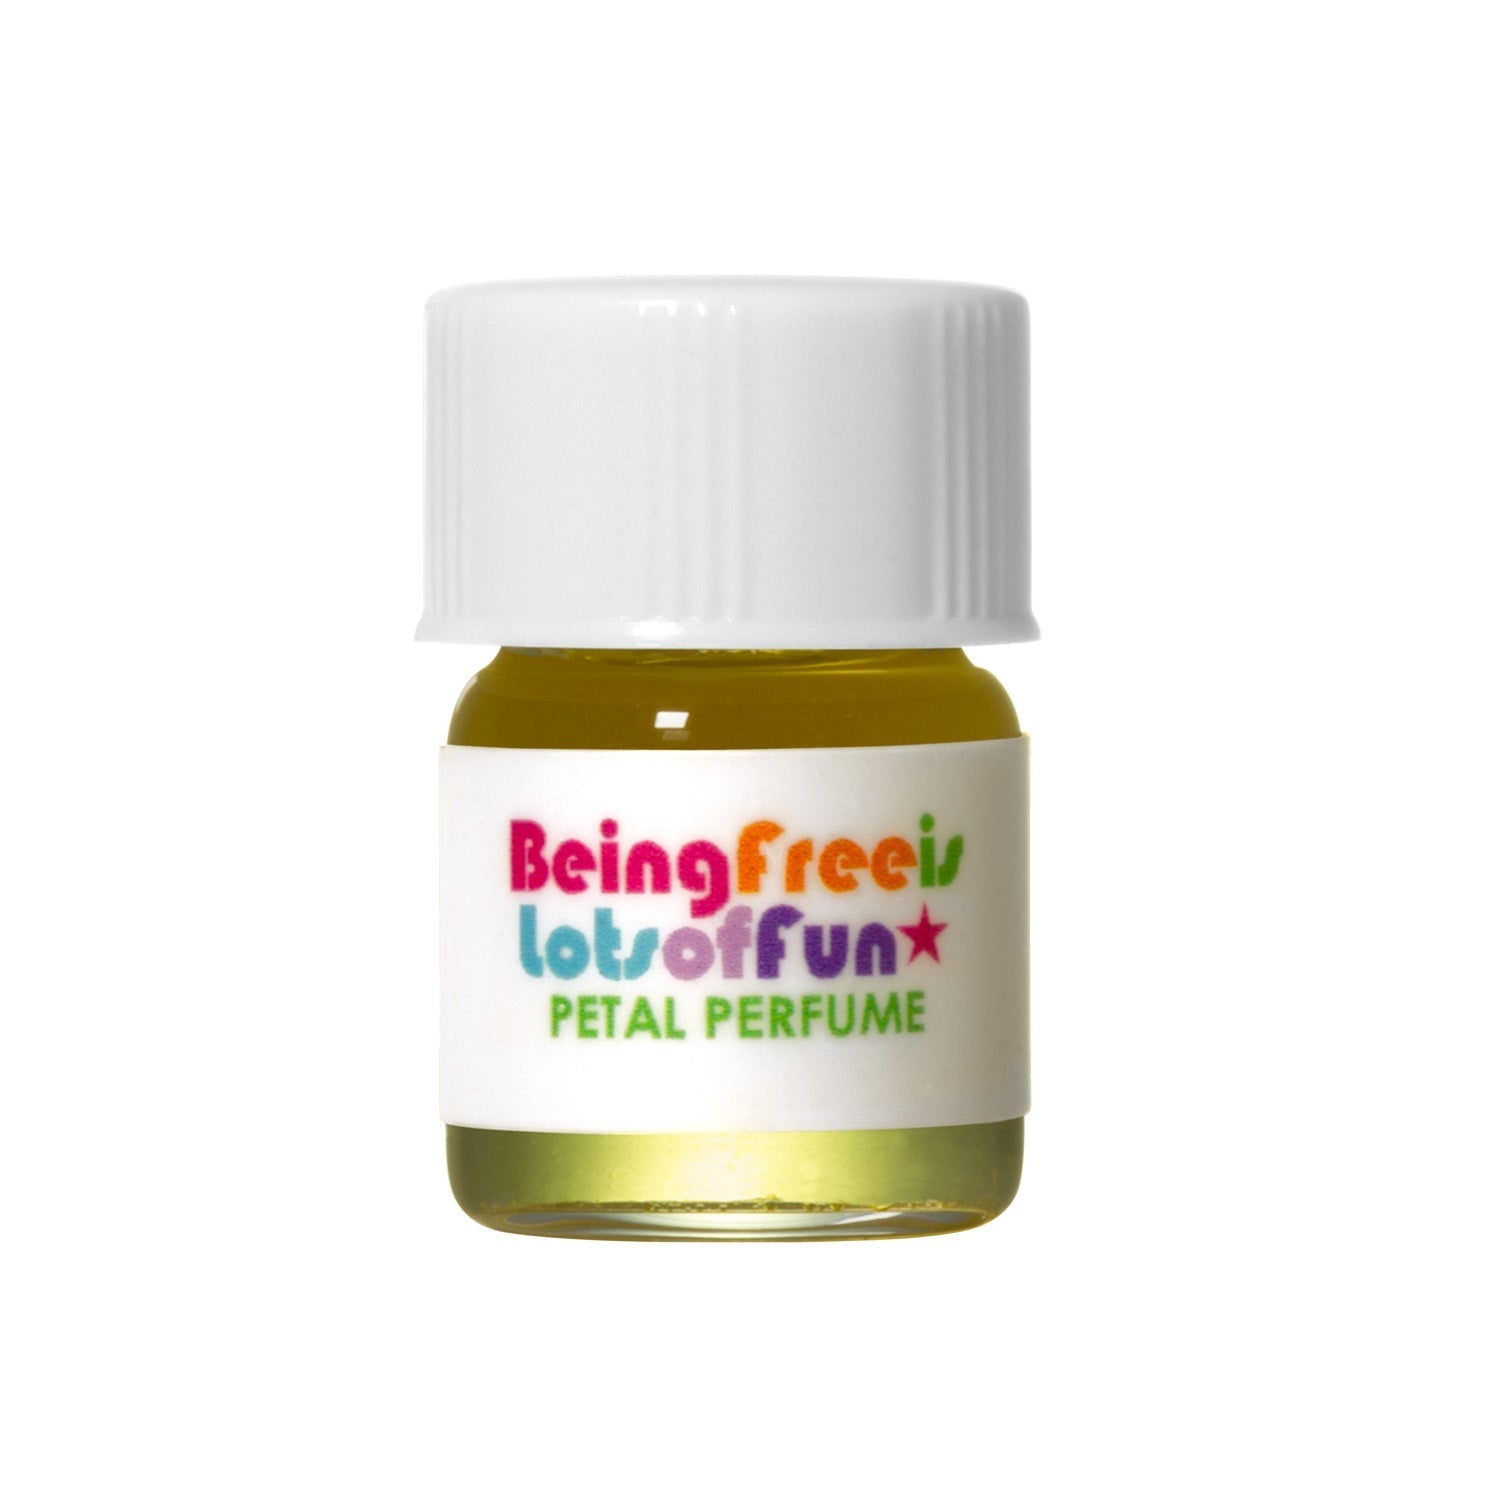 Being Free is Lots of Fun Petal Perfume - Tiny Traveller